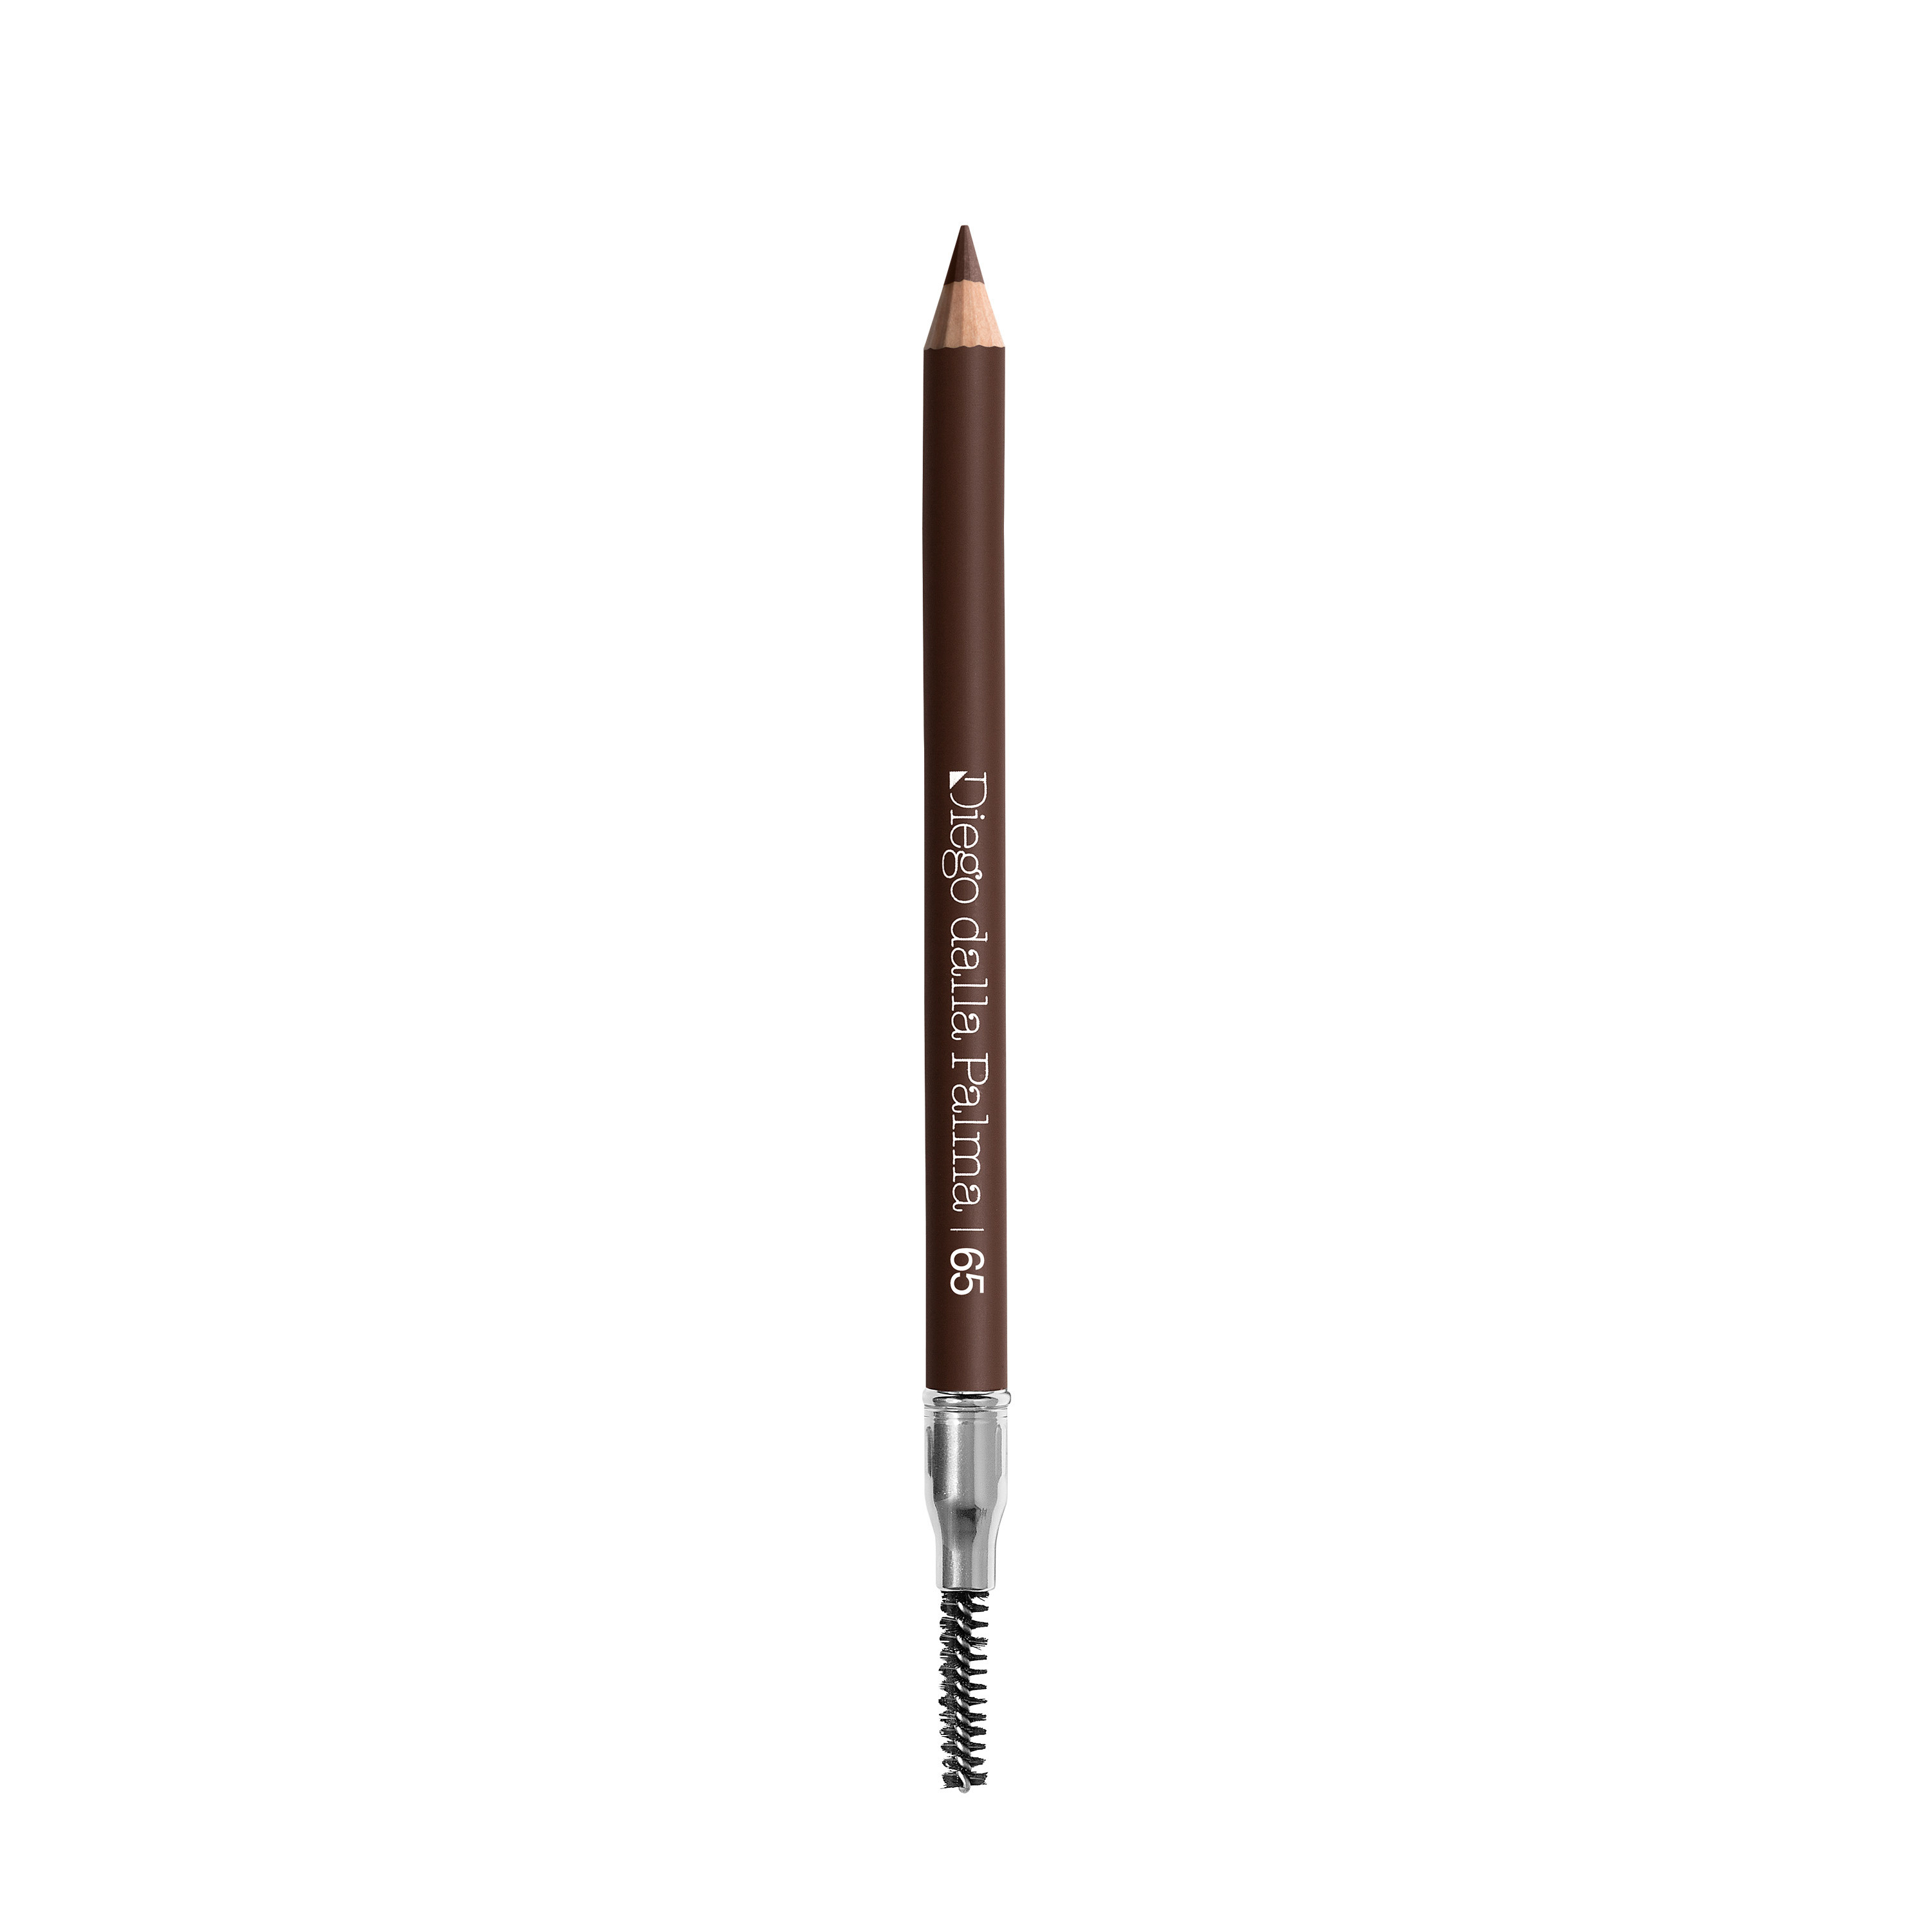 Powder Pencil For Eyebrows - 65 anthracite, Anthracite, large image number 0